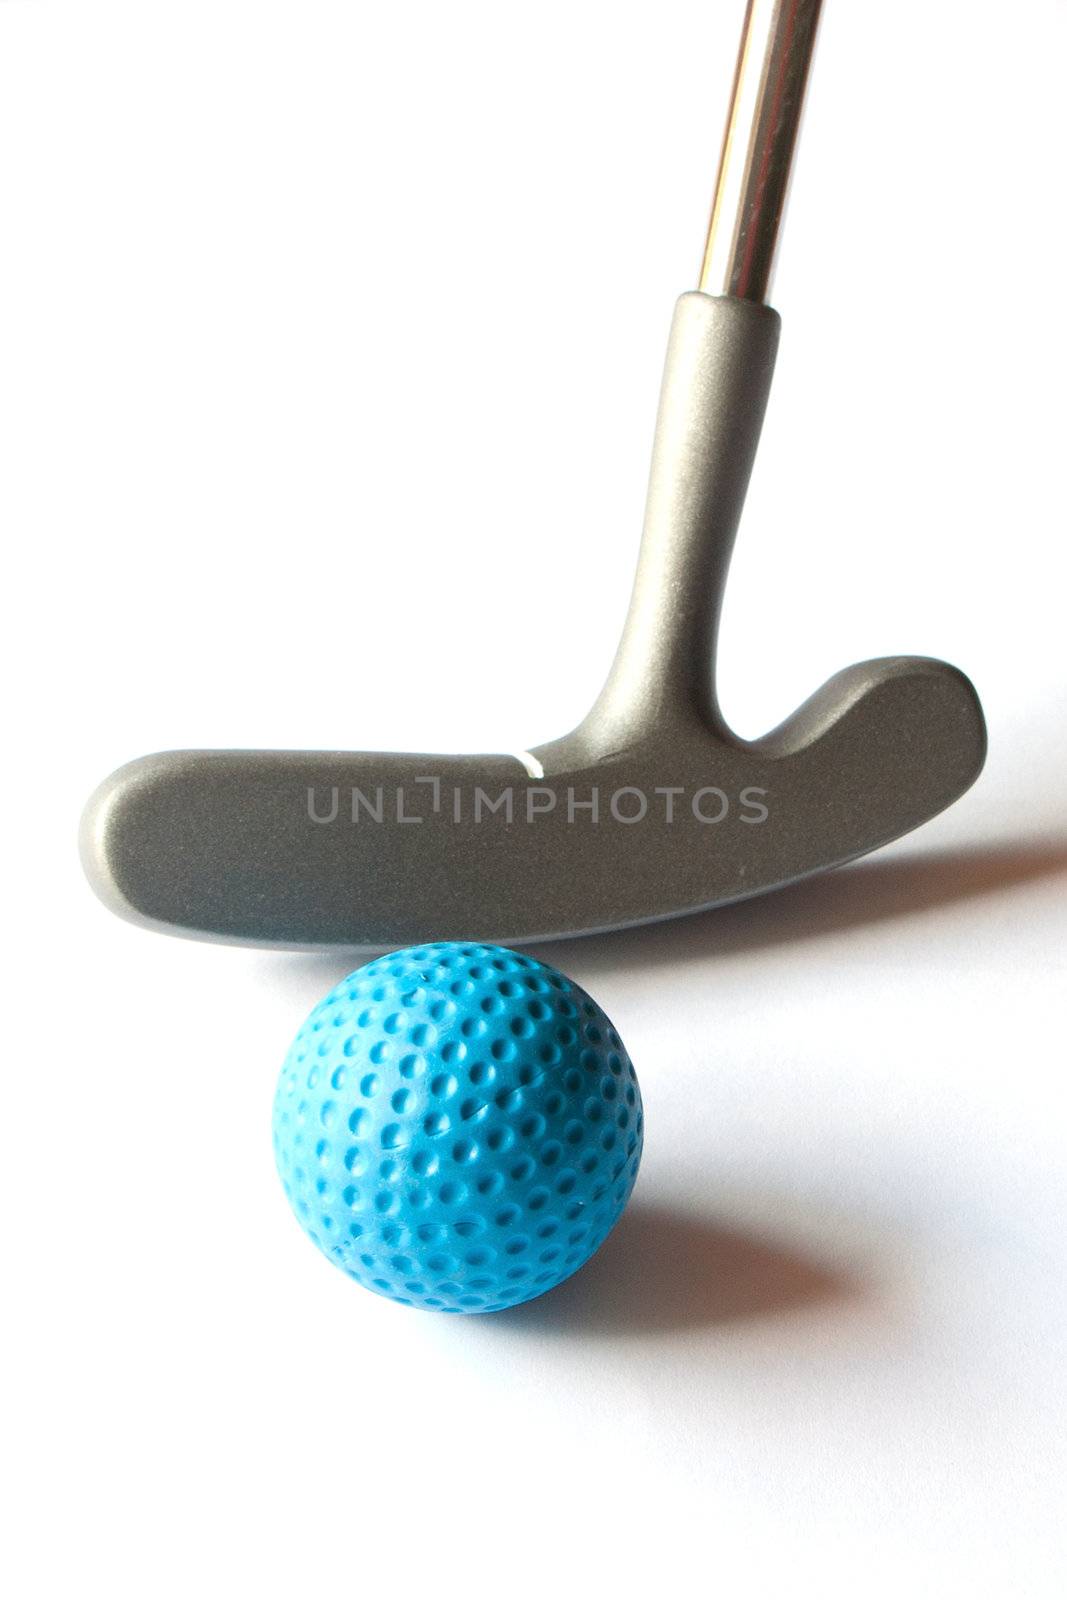 Mini Golf Stick with colored balls on an isolated background